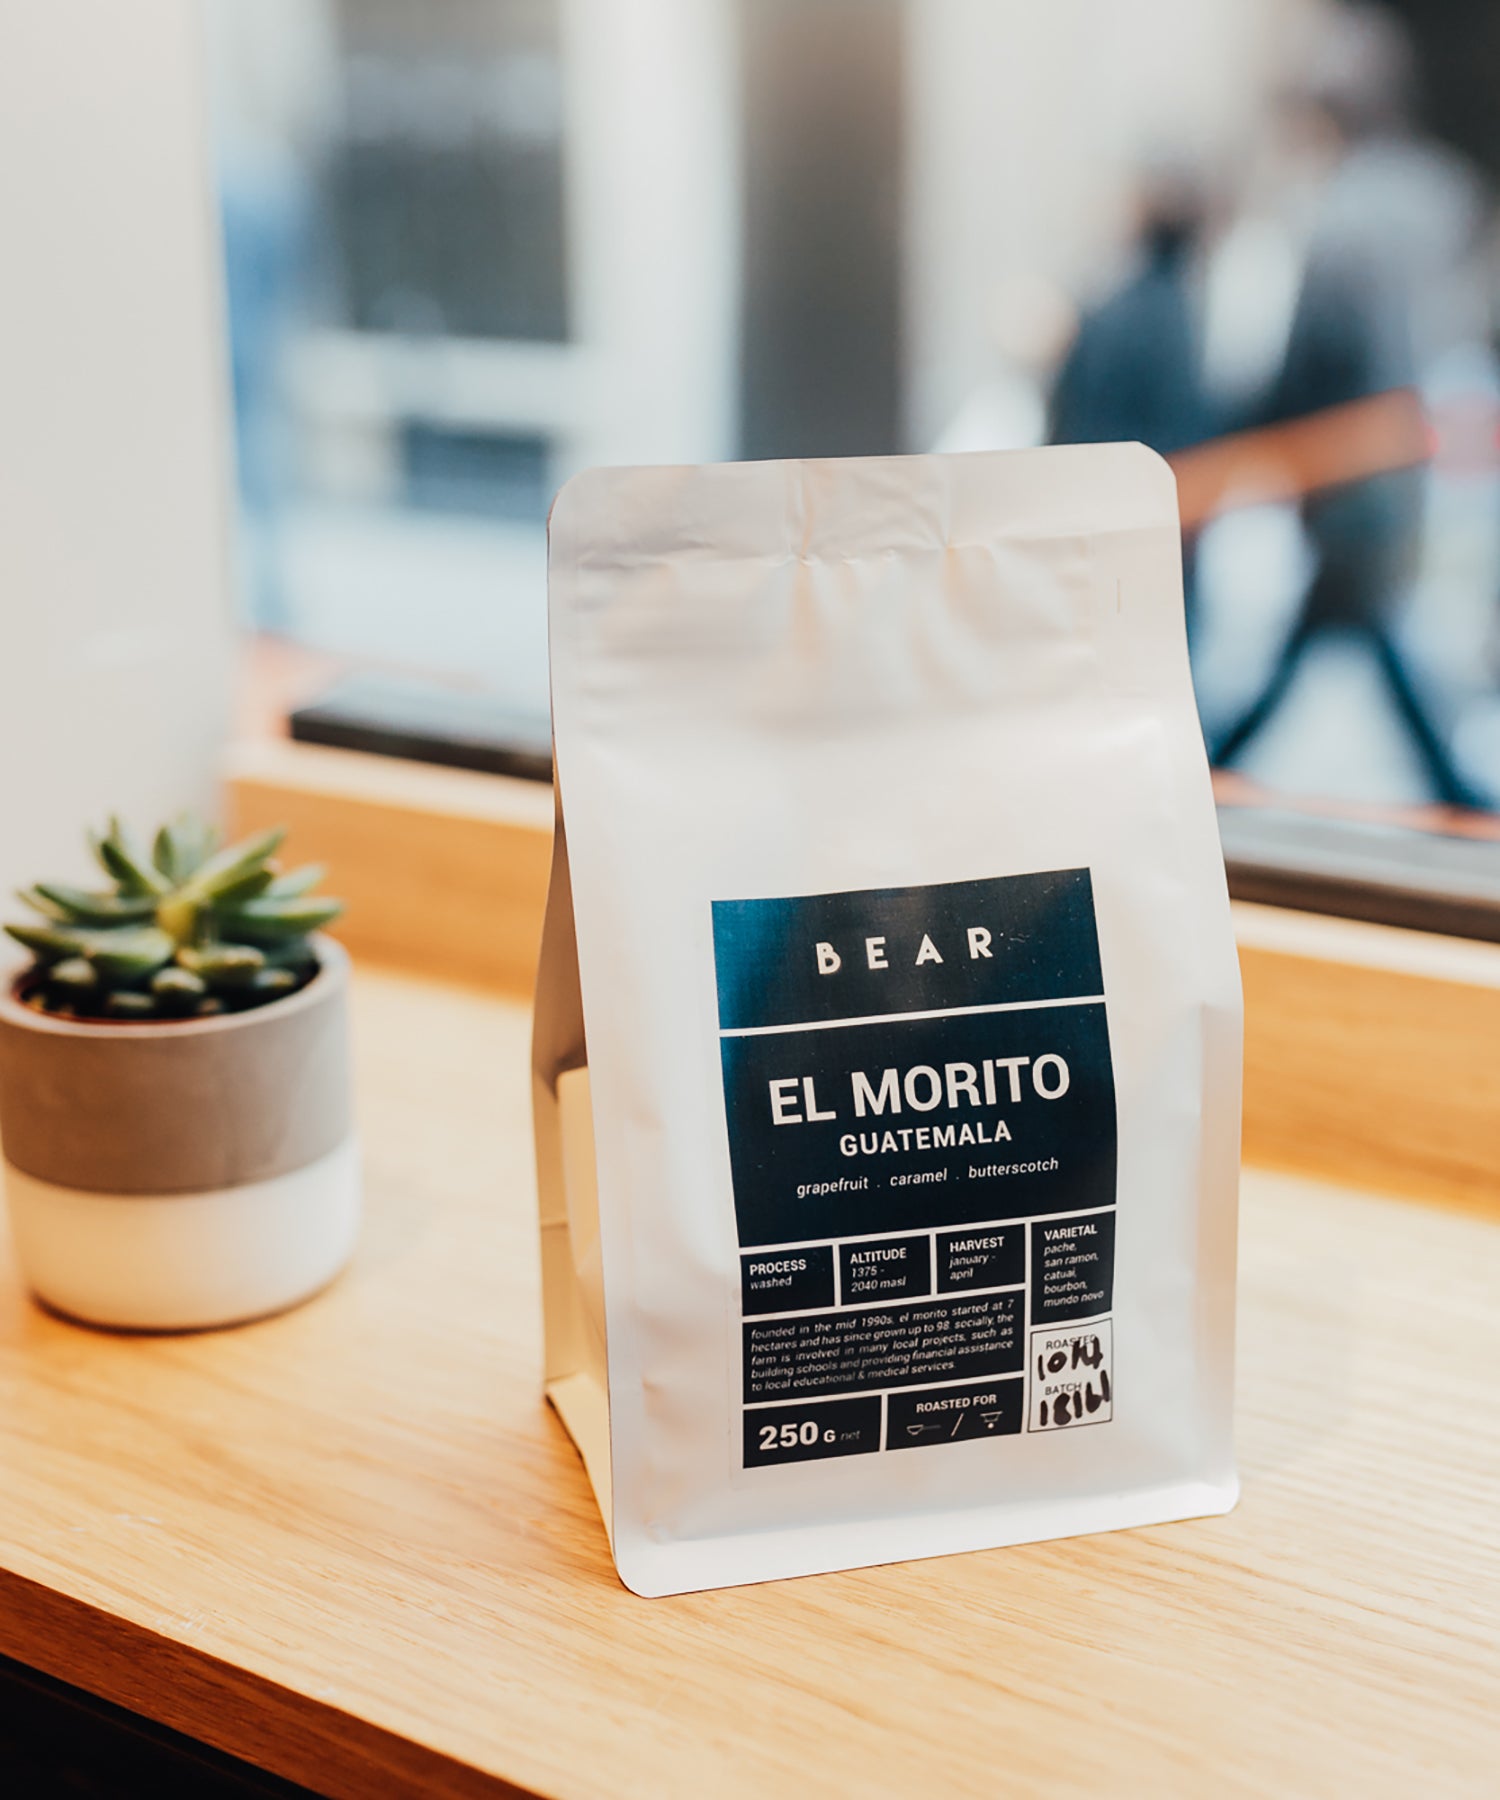 BEAR retail coffee to brew at home